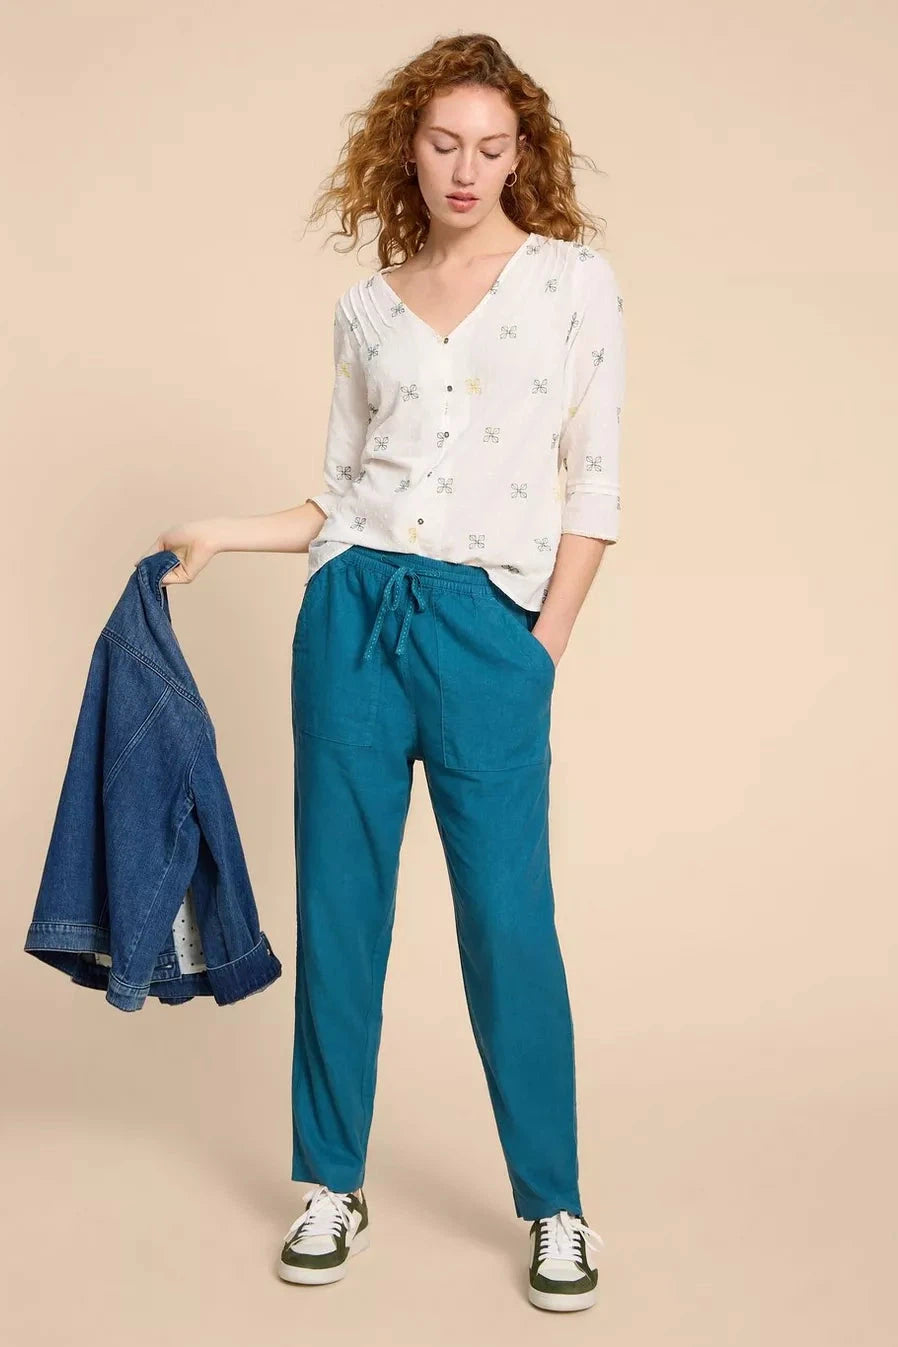 White Stuff Elle Linen Blend Trousers in Mid Teal-Womens-Ohh! By Gum - Shop Sustainable